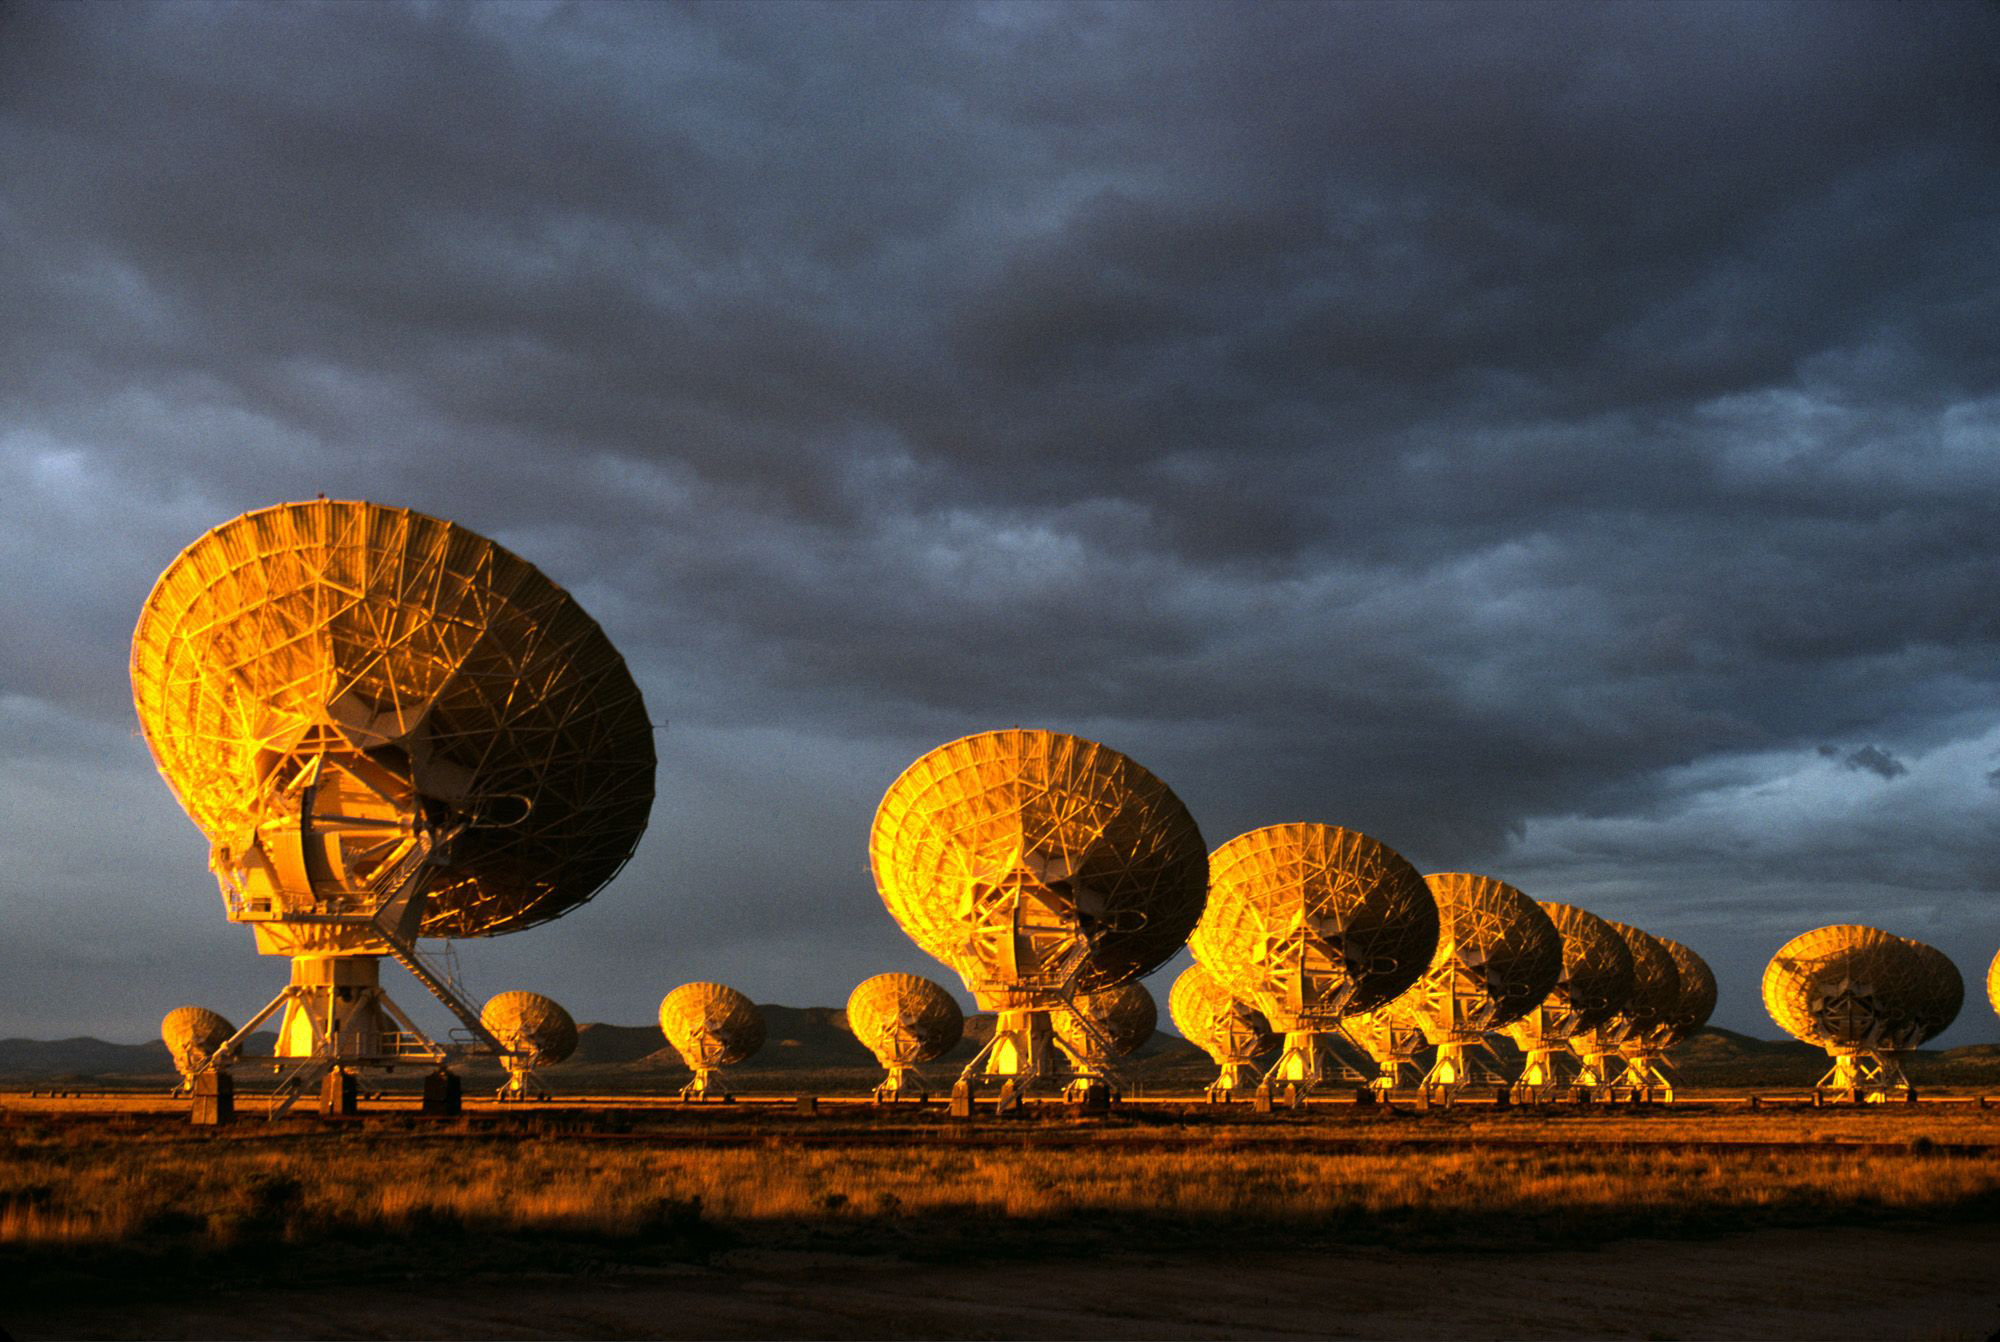 NSF has many facilities requiring access to the spectrum including the Karl G. Jansky Very Large Array